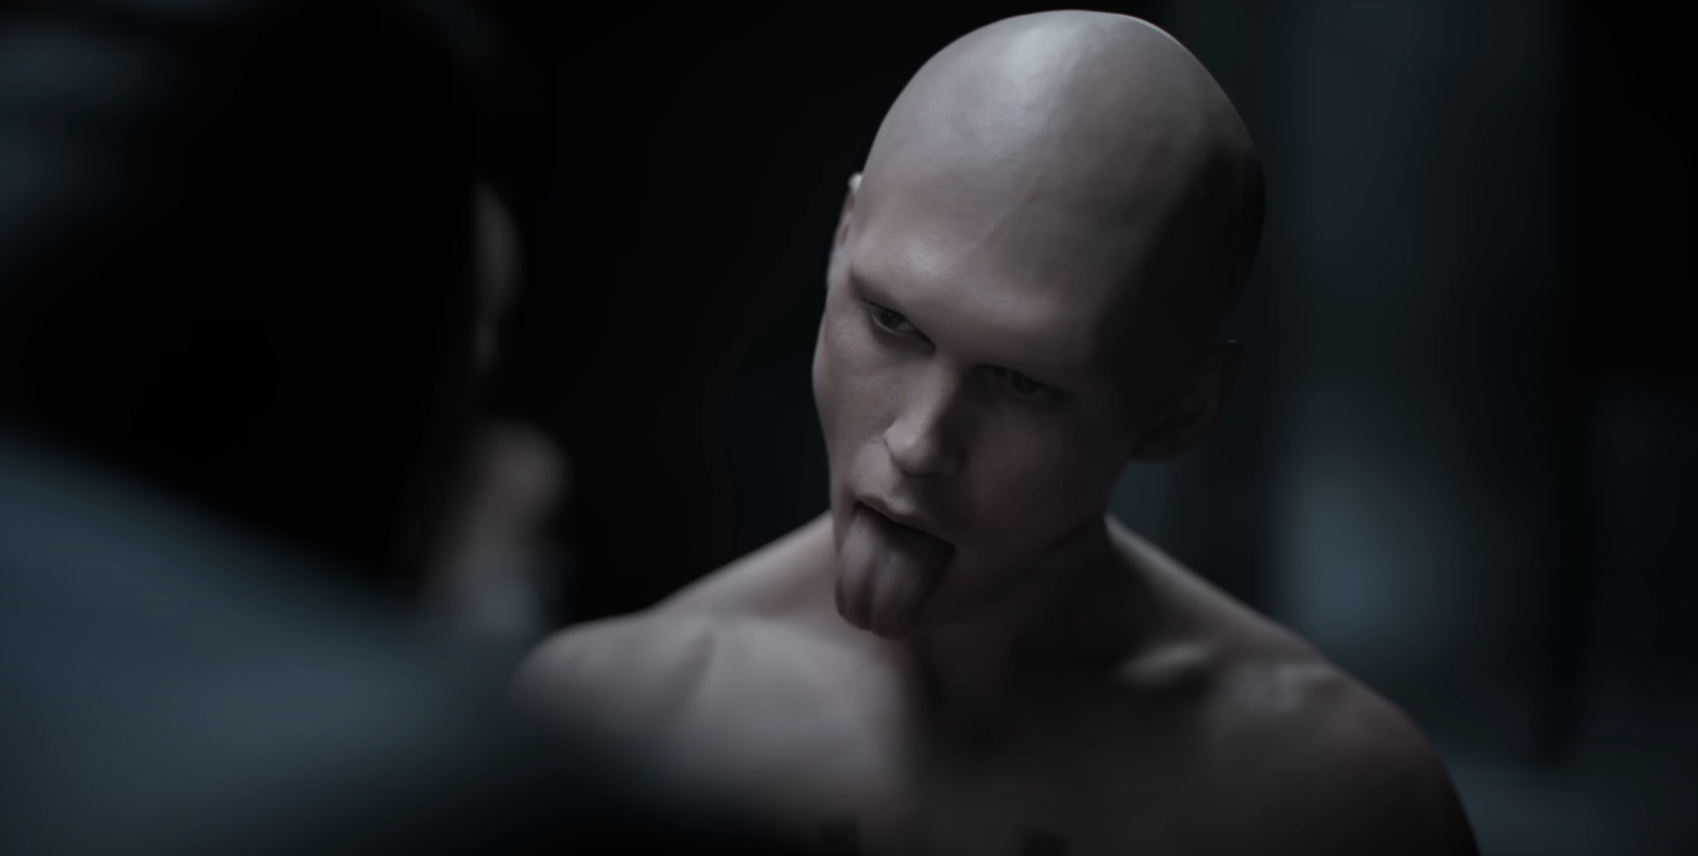 Austin, with a bald head, sticks his tongue out at someone in a dimly lit room